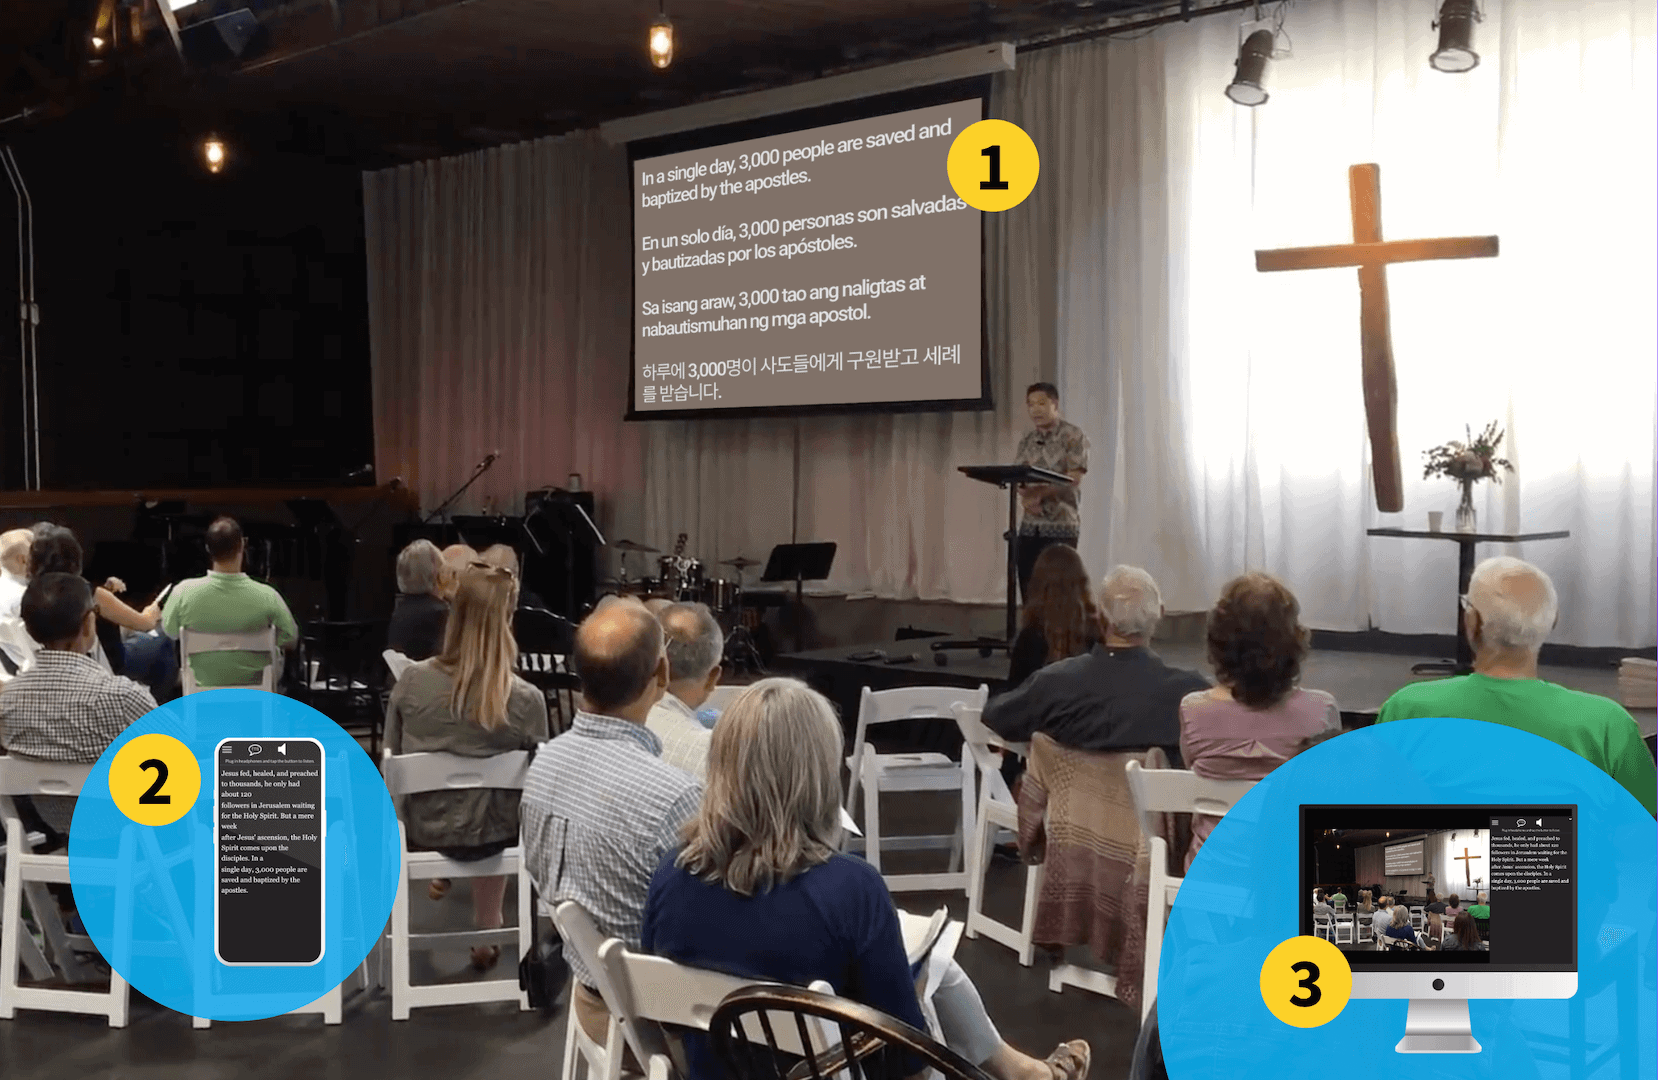 An image of someone preaching with 4 languages on display and the numbers 1-3 highlighting how translation can be provided on screen, on phone and online.